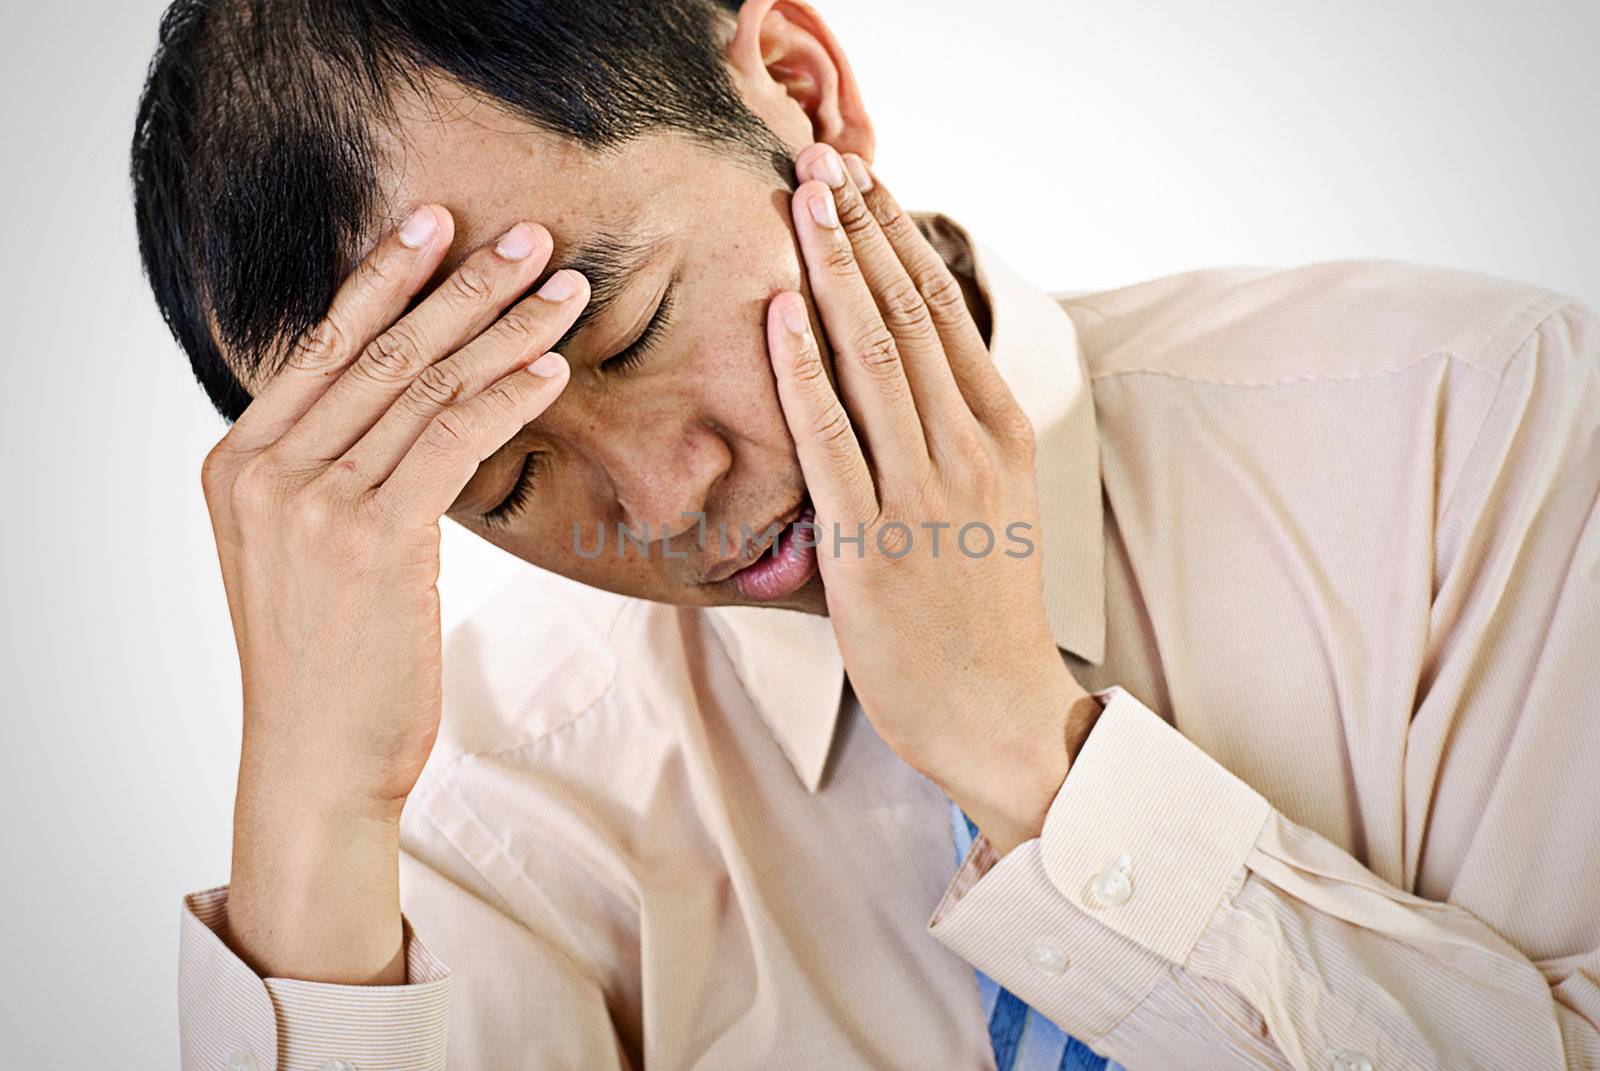 Sick businessman portrait of Asian with painful expression.